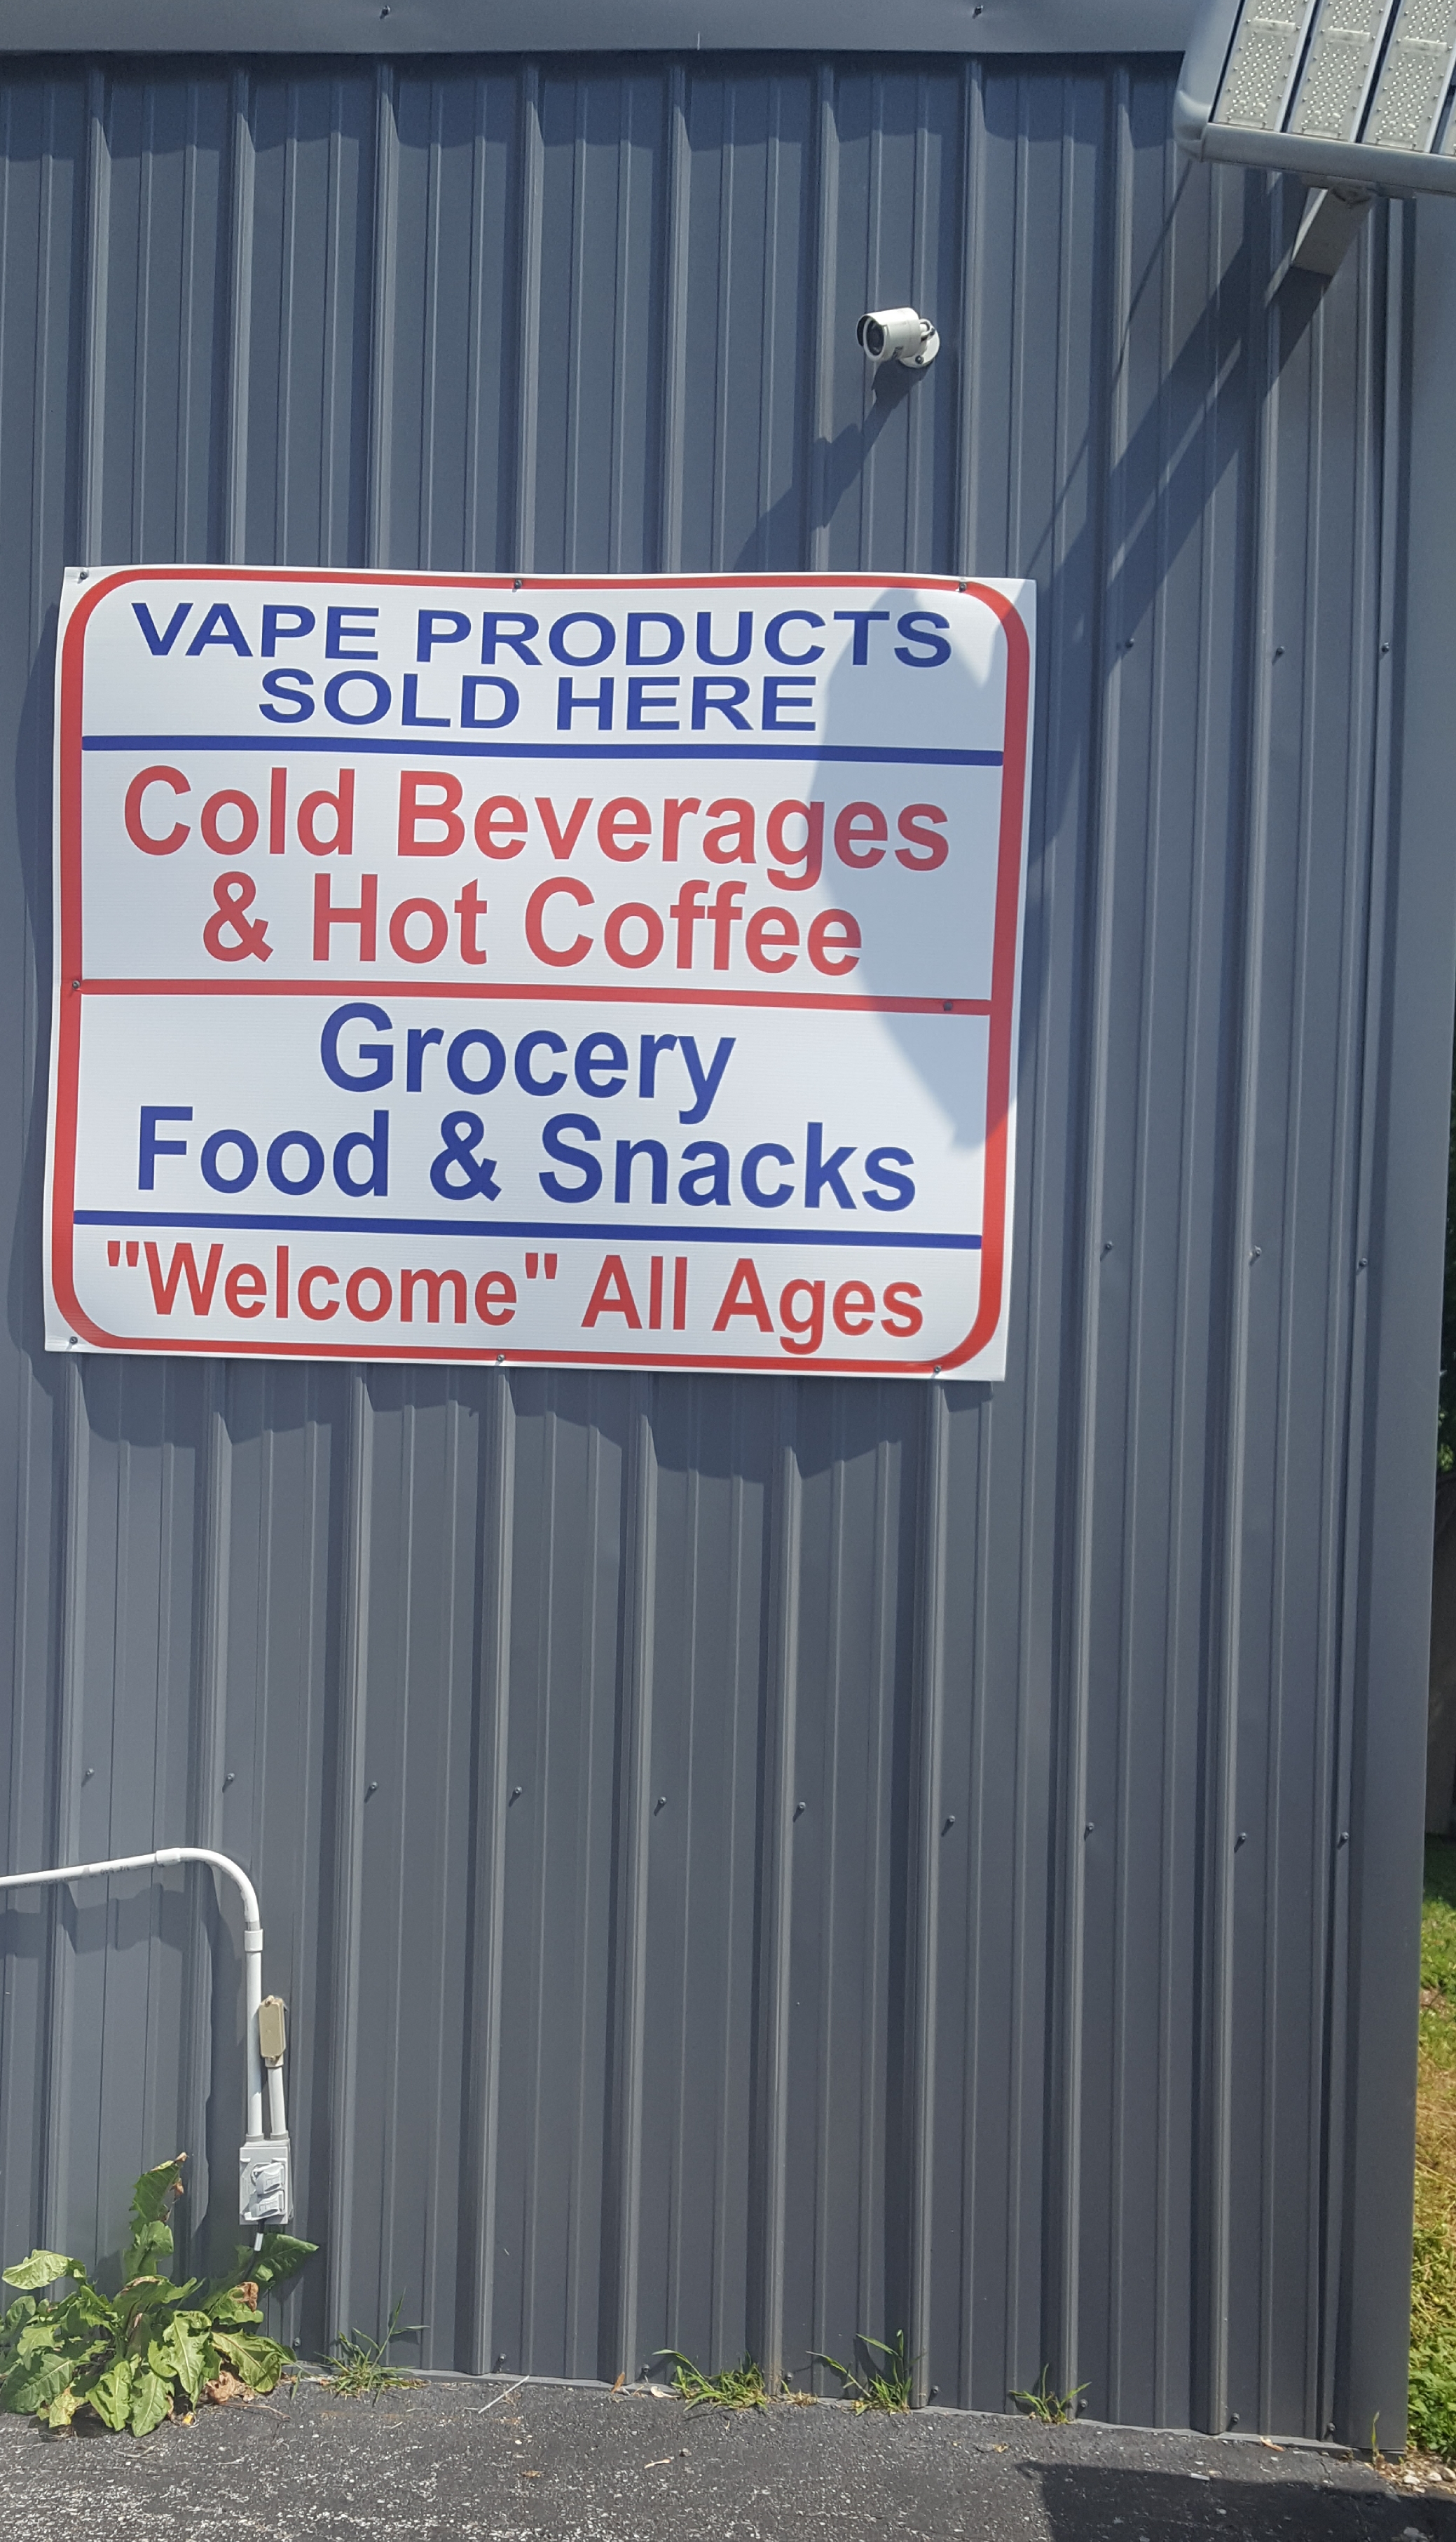 Sign saying "Vape Products Sold Here" and "Welcome All Ages"